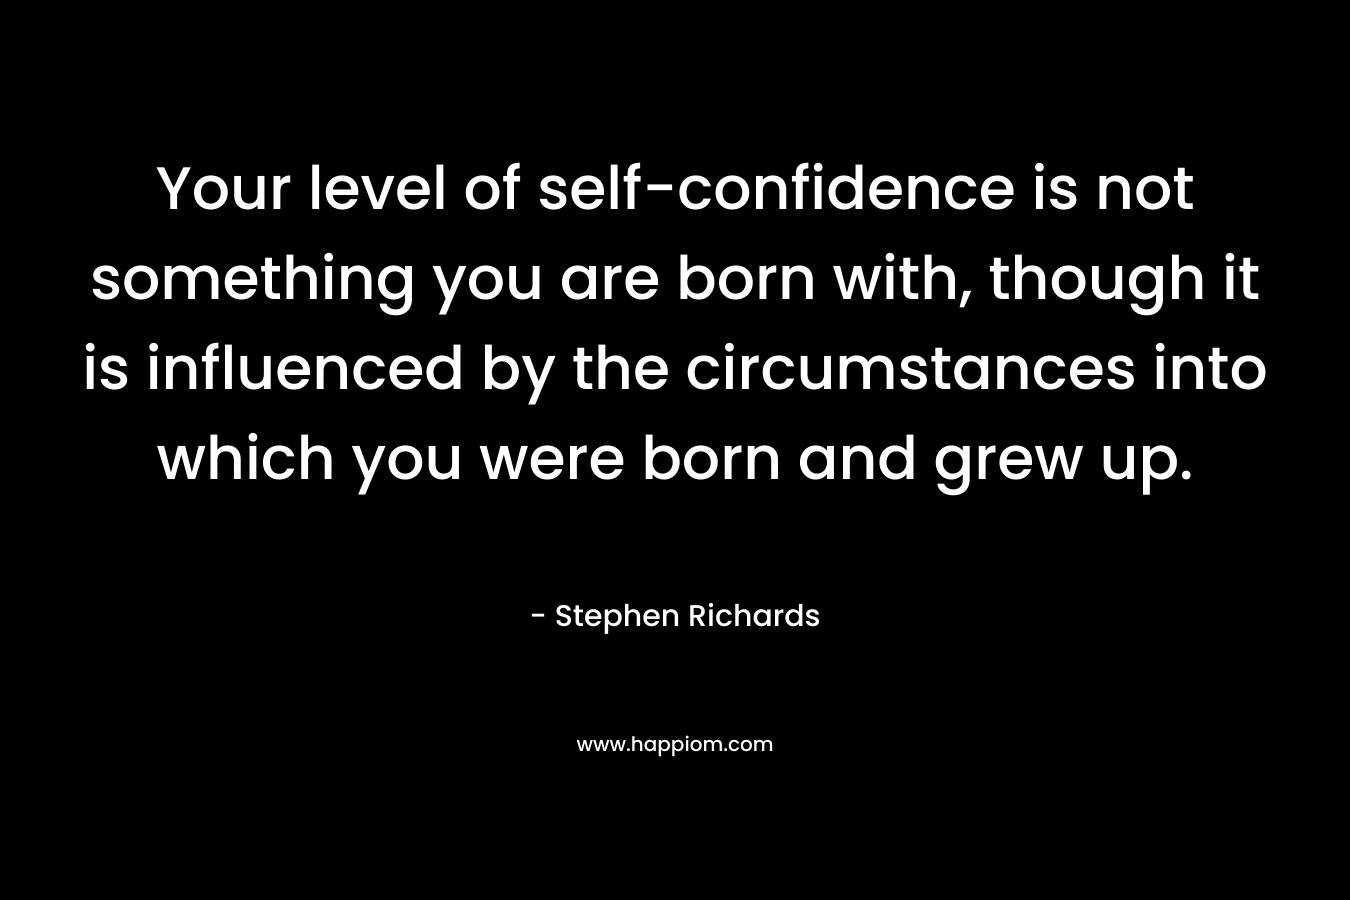 Your level of self-confidence is not something you are born with, though it is influenced by the circumstances into which you were born and grew up.